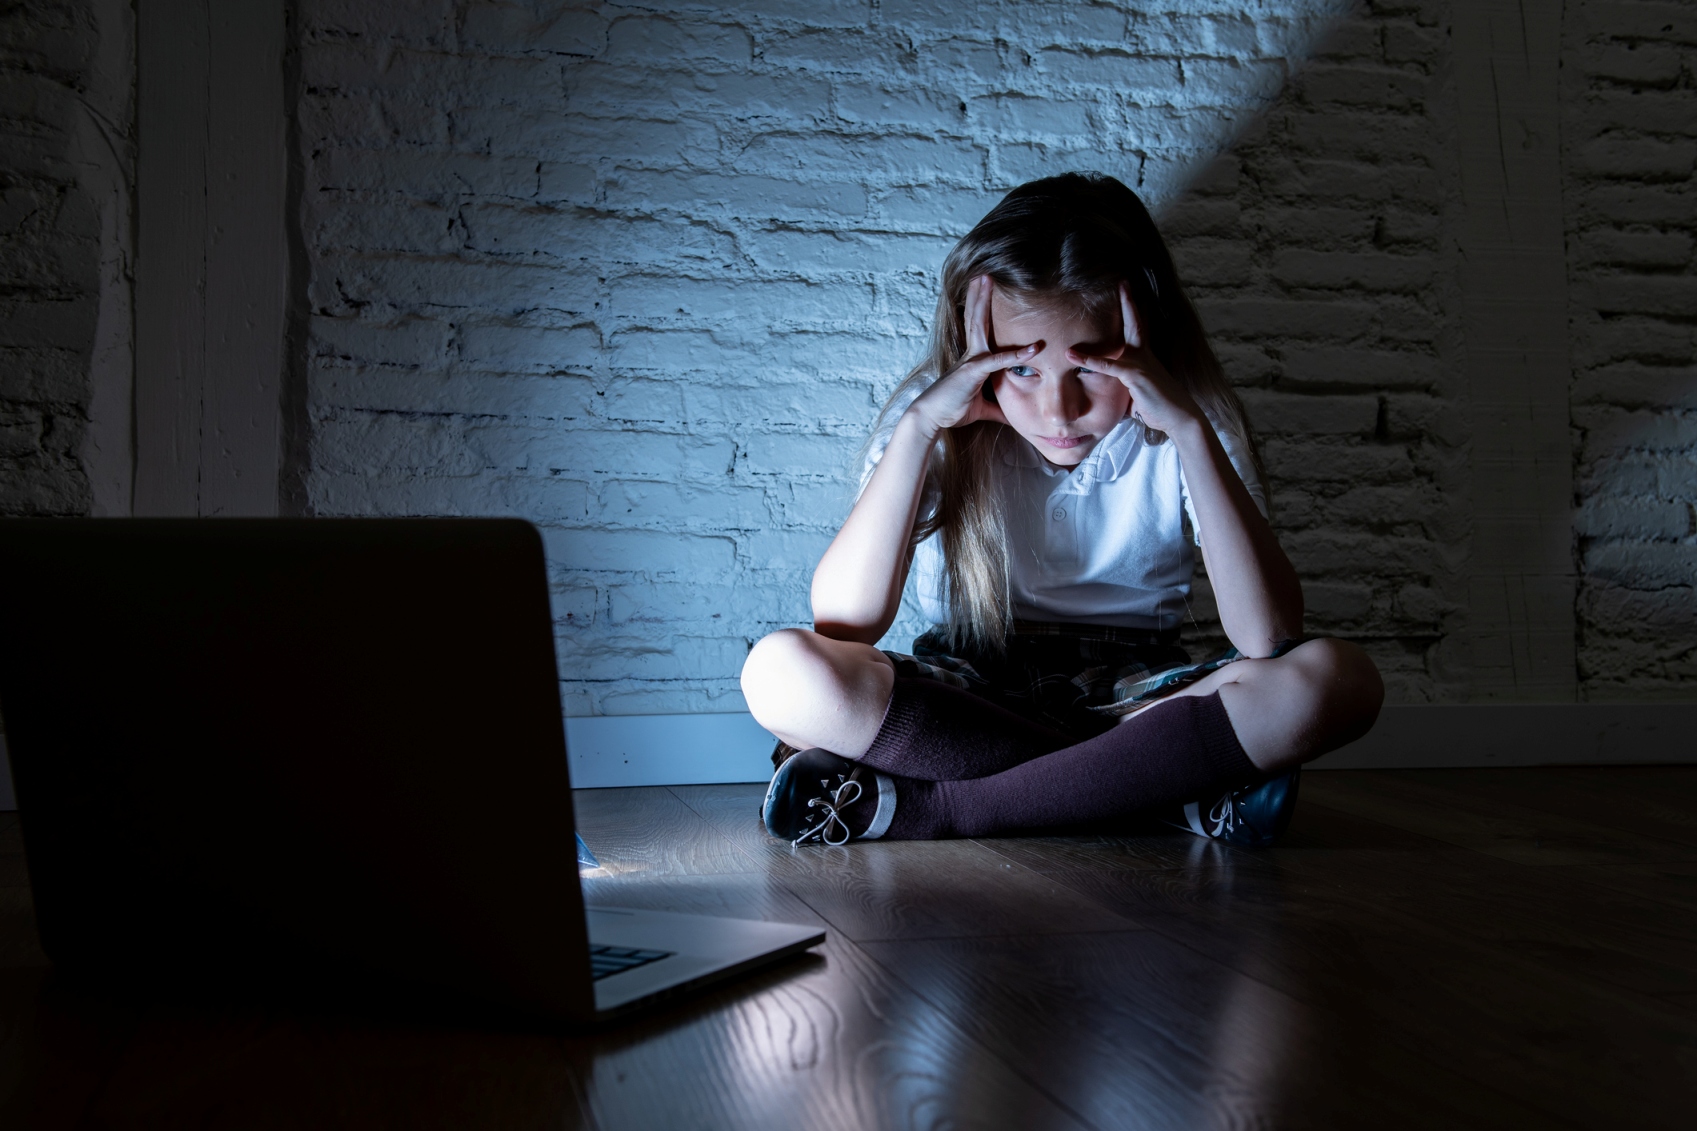 Bullying: Online and in the Classroom